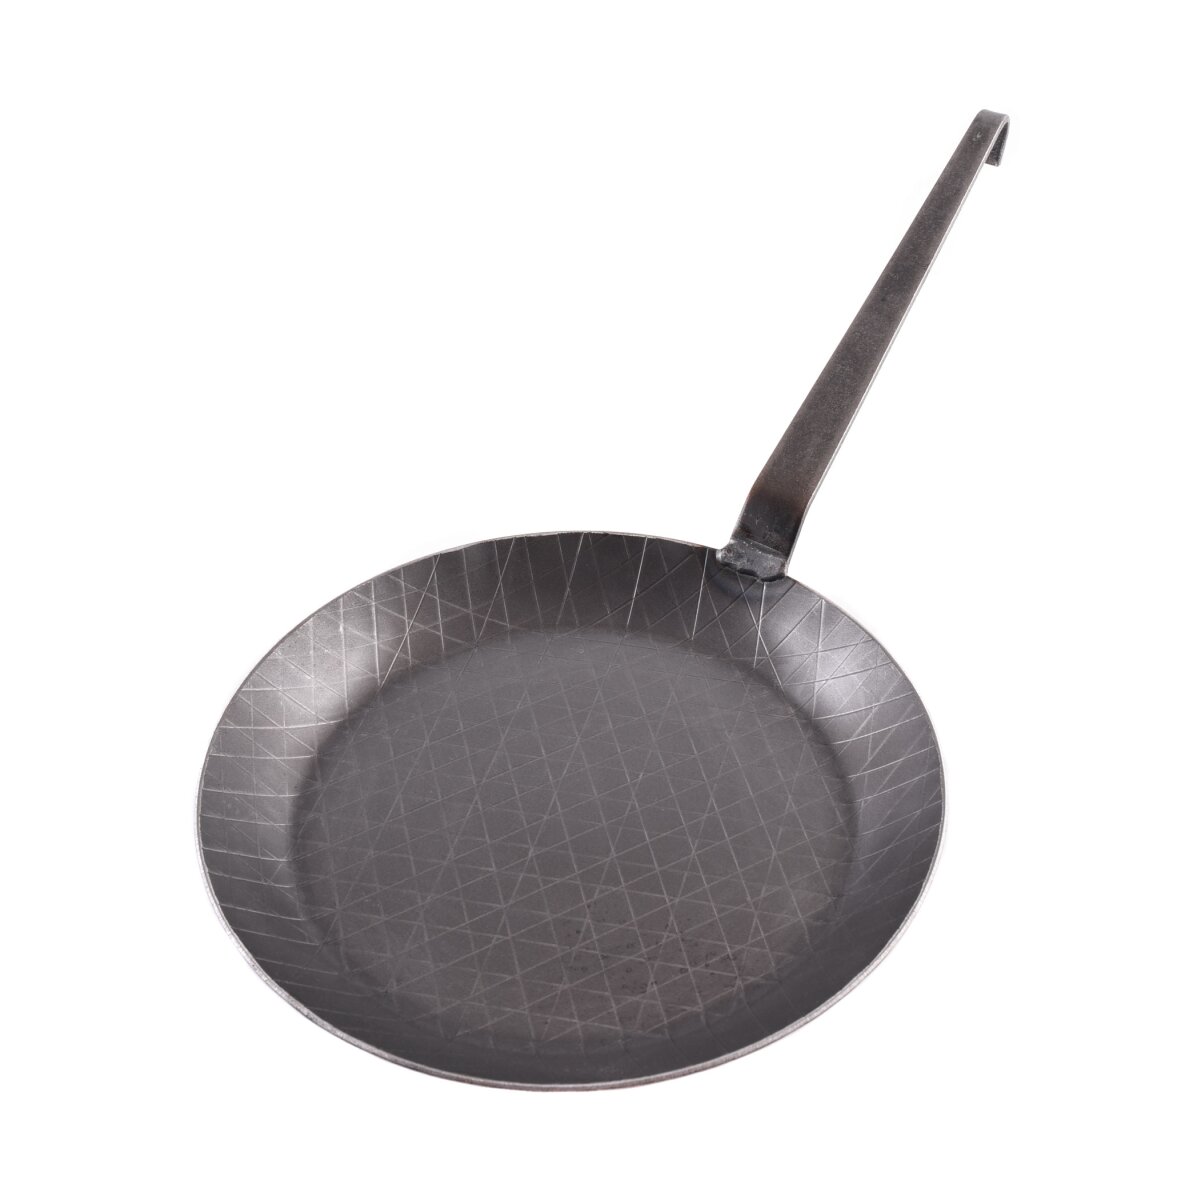 Frying pan with forged hook handle, approx. 28cm